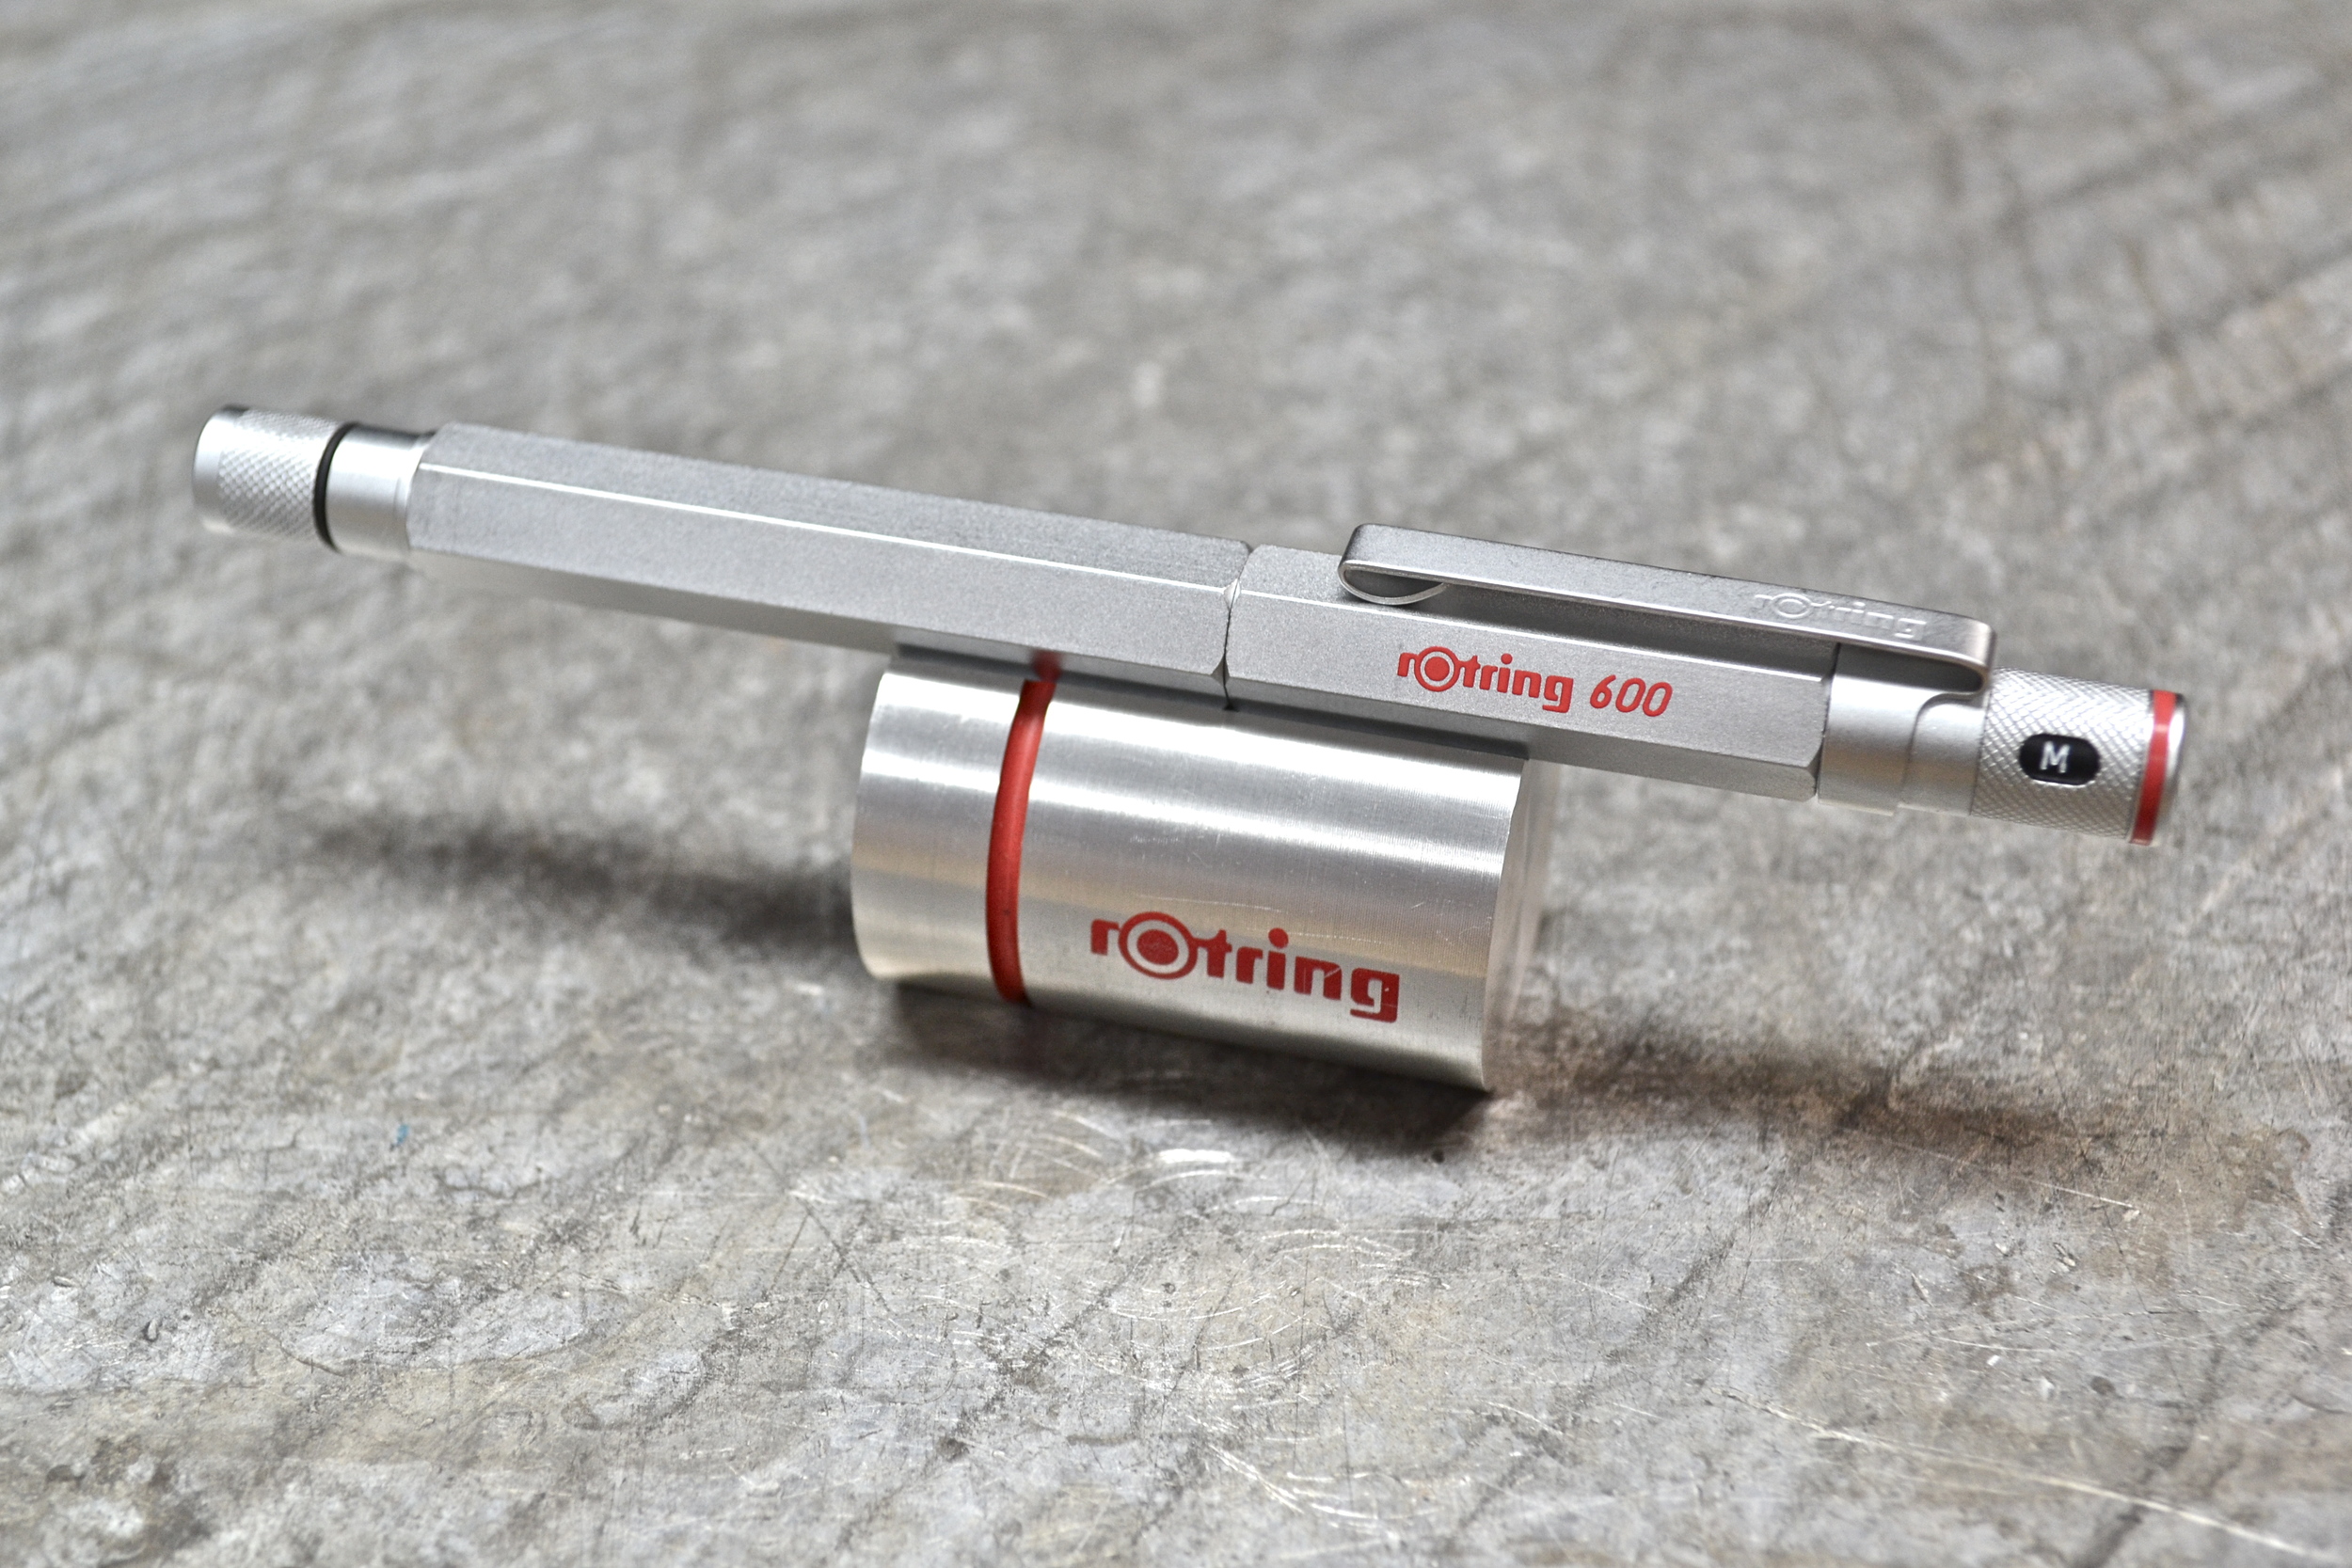 So, you want to buy a vintage rOtring? A guide of sorts. — The Clicky Post